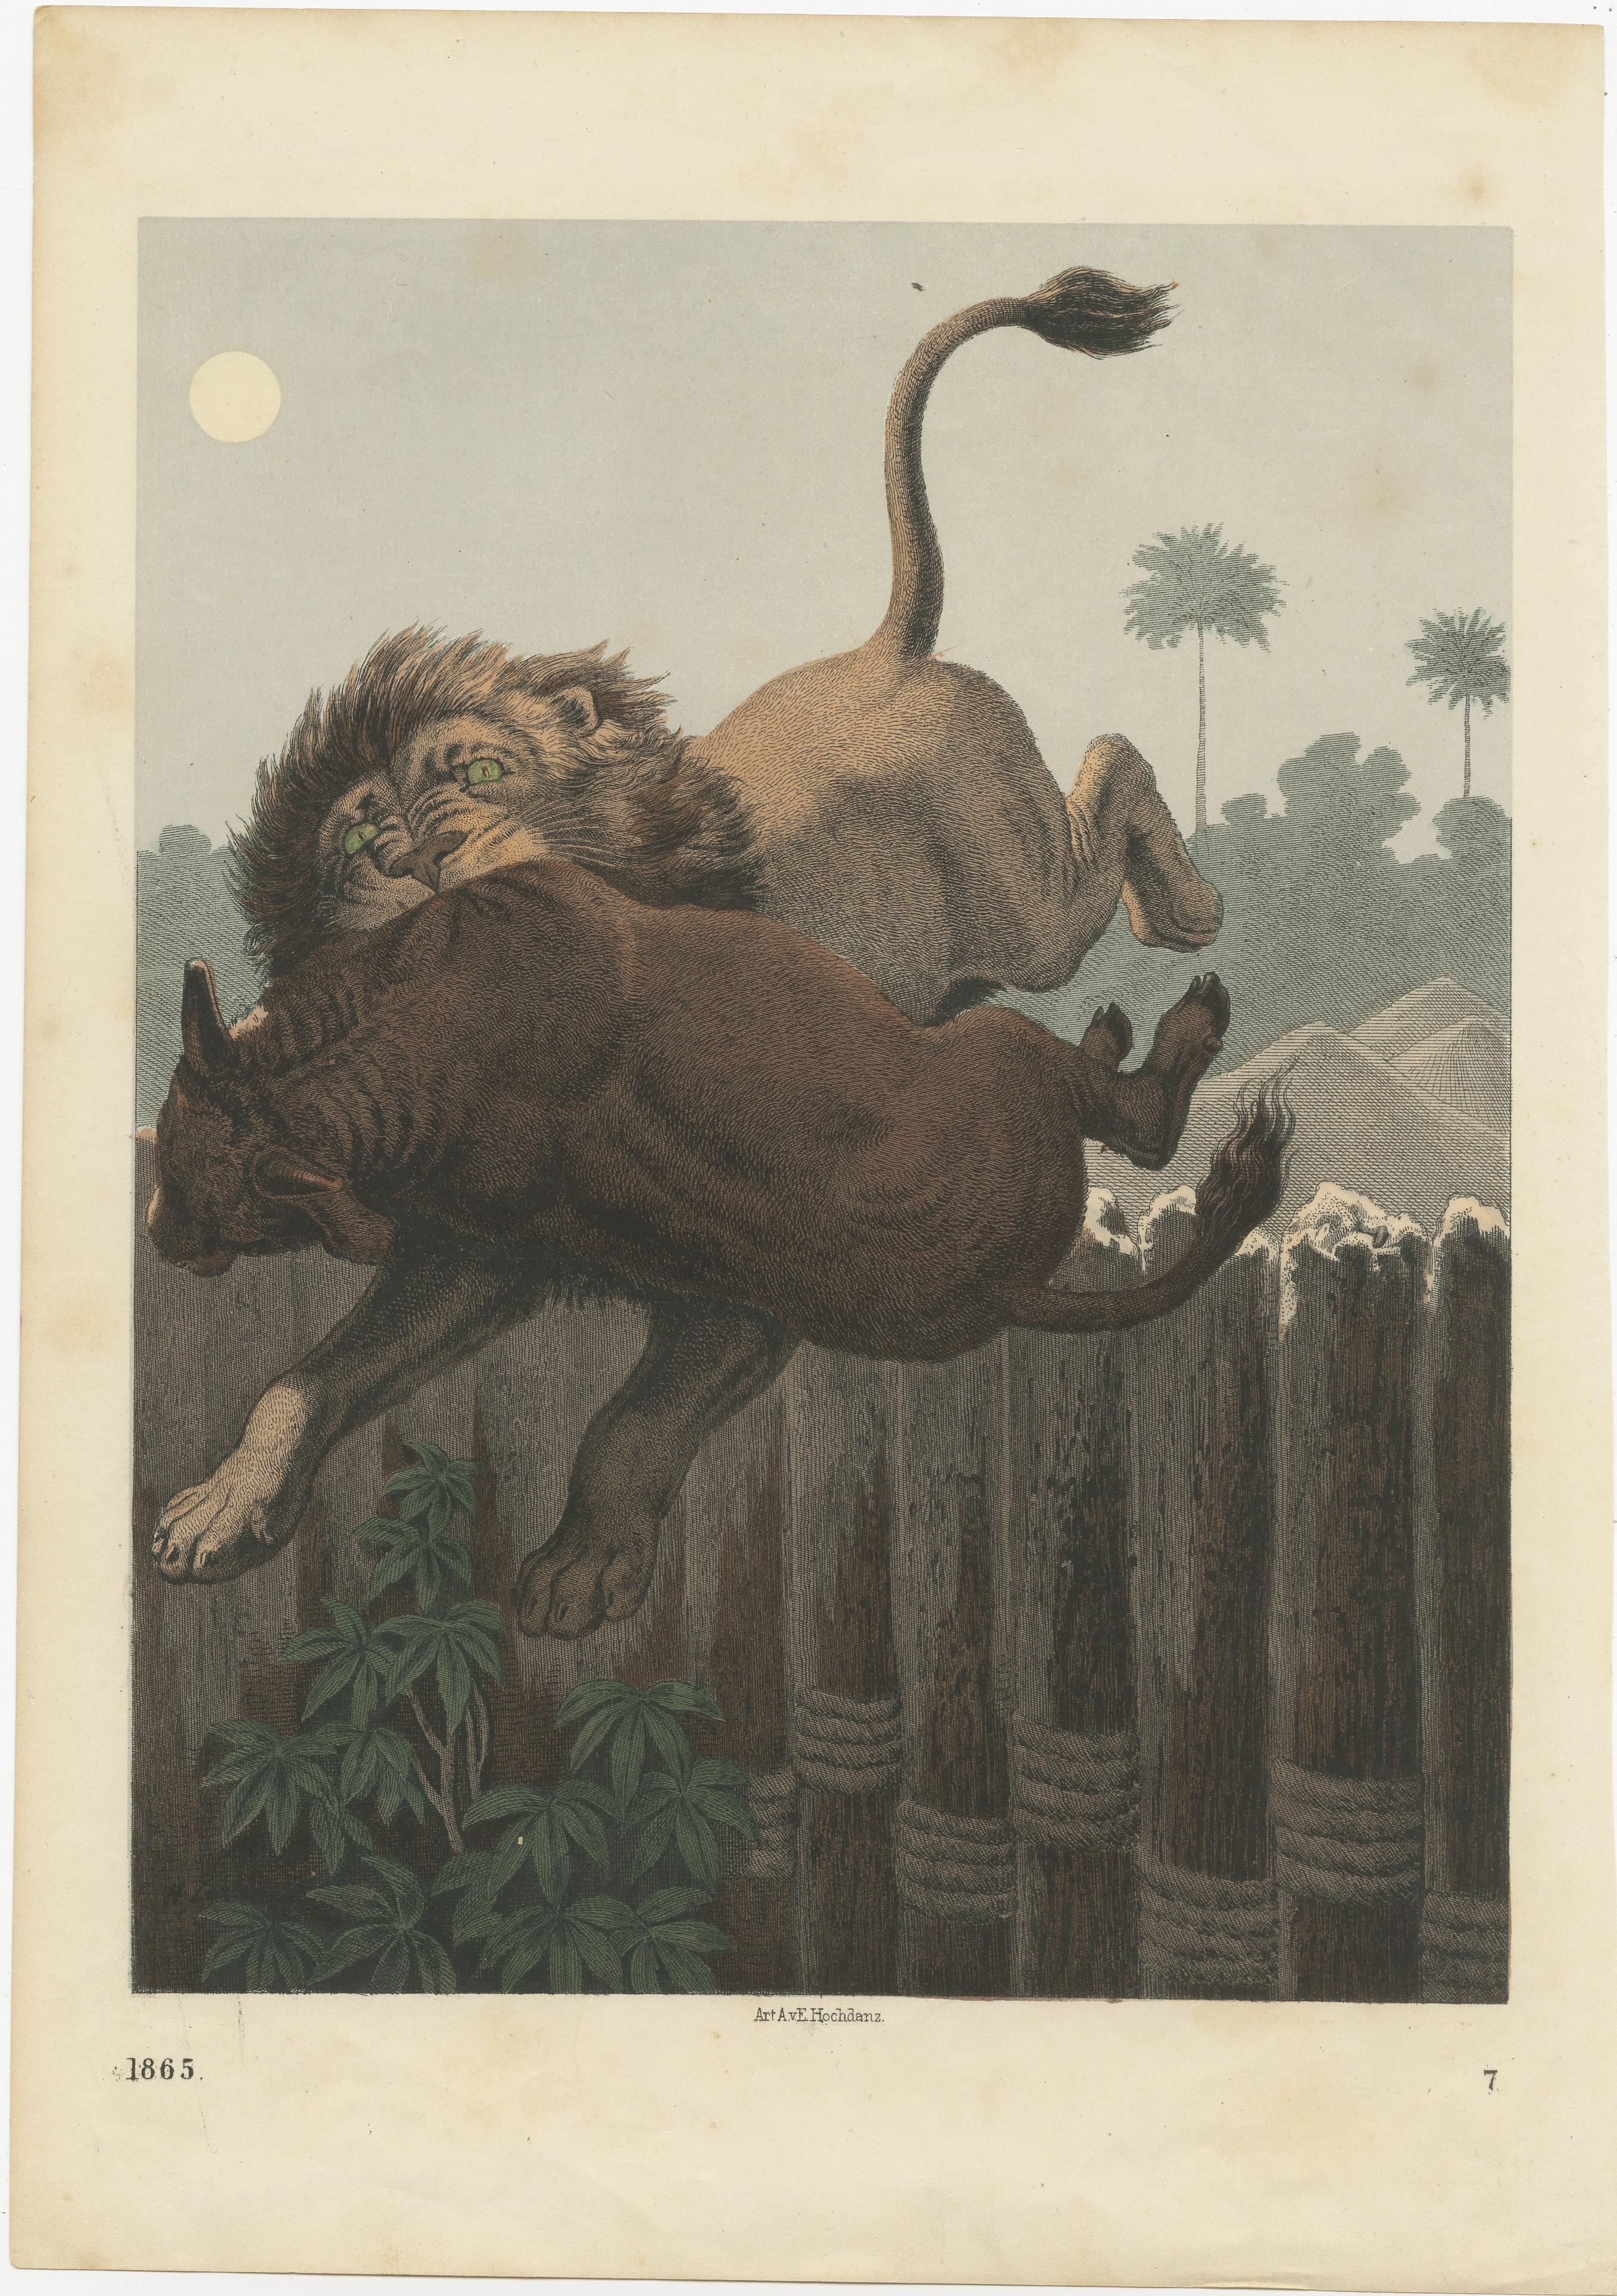 Original colored lithograph of a lion attack. Published by or after E. Hochdanz. Source unknown, to be determined. Published circa 1865. 